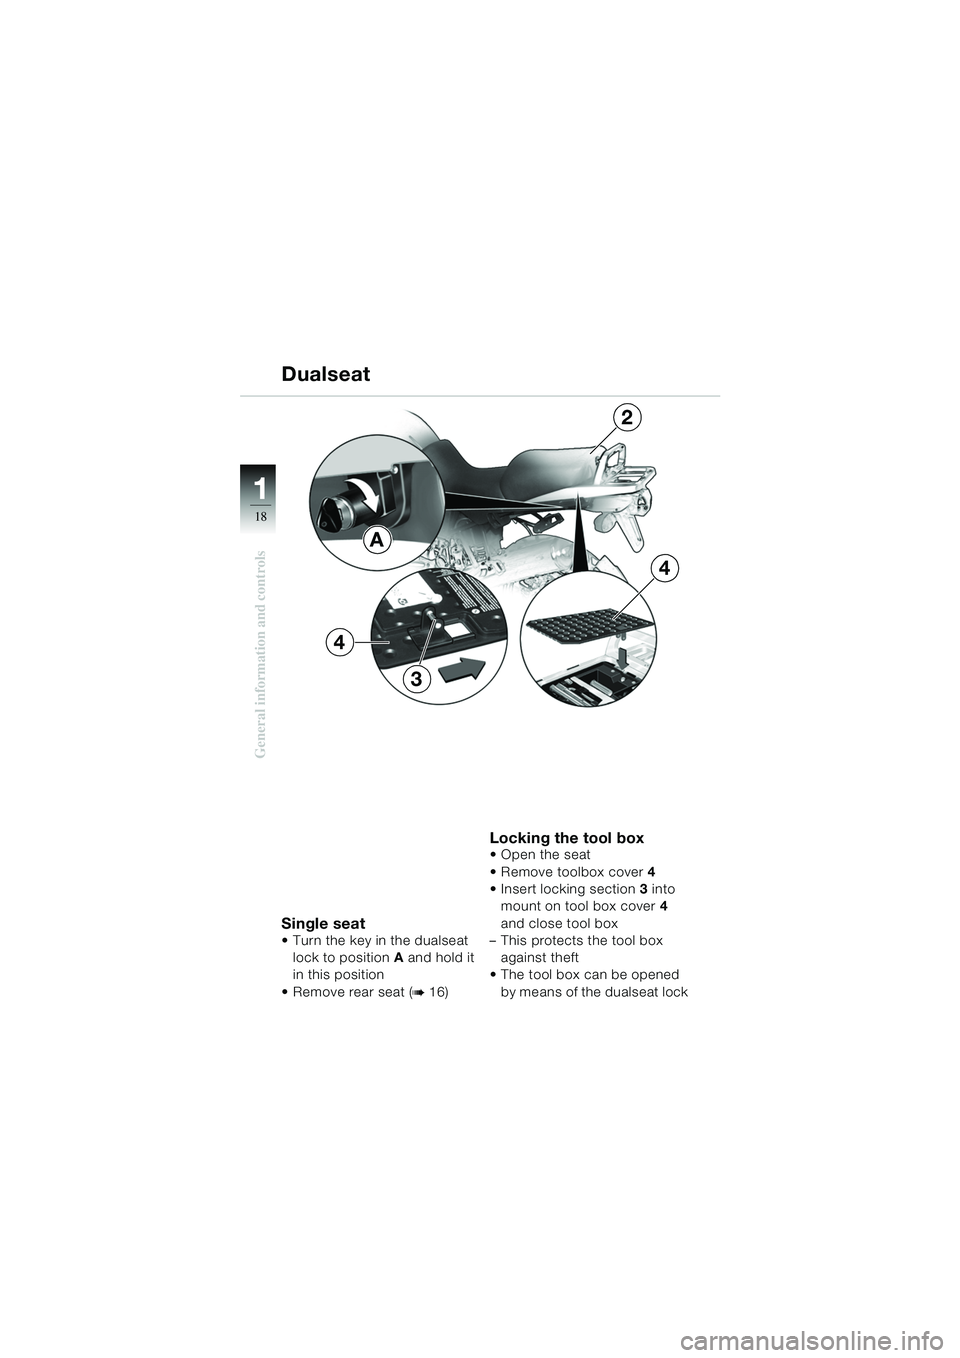 BMW MOTORRAD R 1150 GS 2002  Riders Manual (in English) 11
18
General information and controls
Single seat Turn the key in the dualseat lock to position A and hold it 
in this position
 Remove rear seat (
b16)
Locking the tool boxOpen the seat
 Remove 